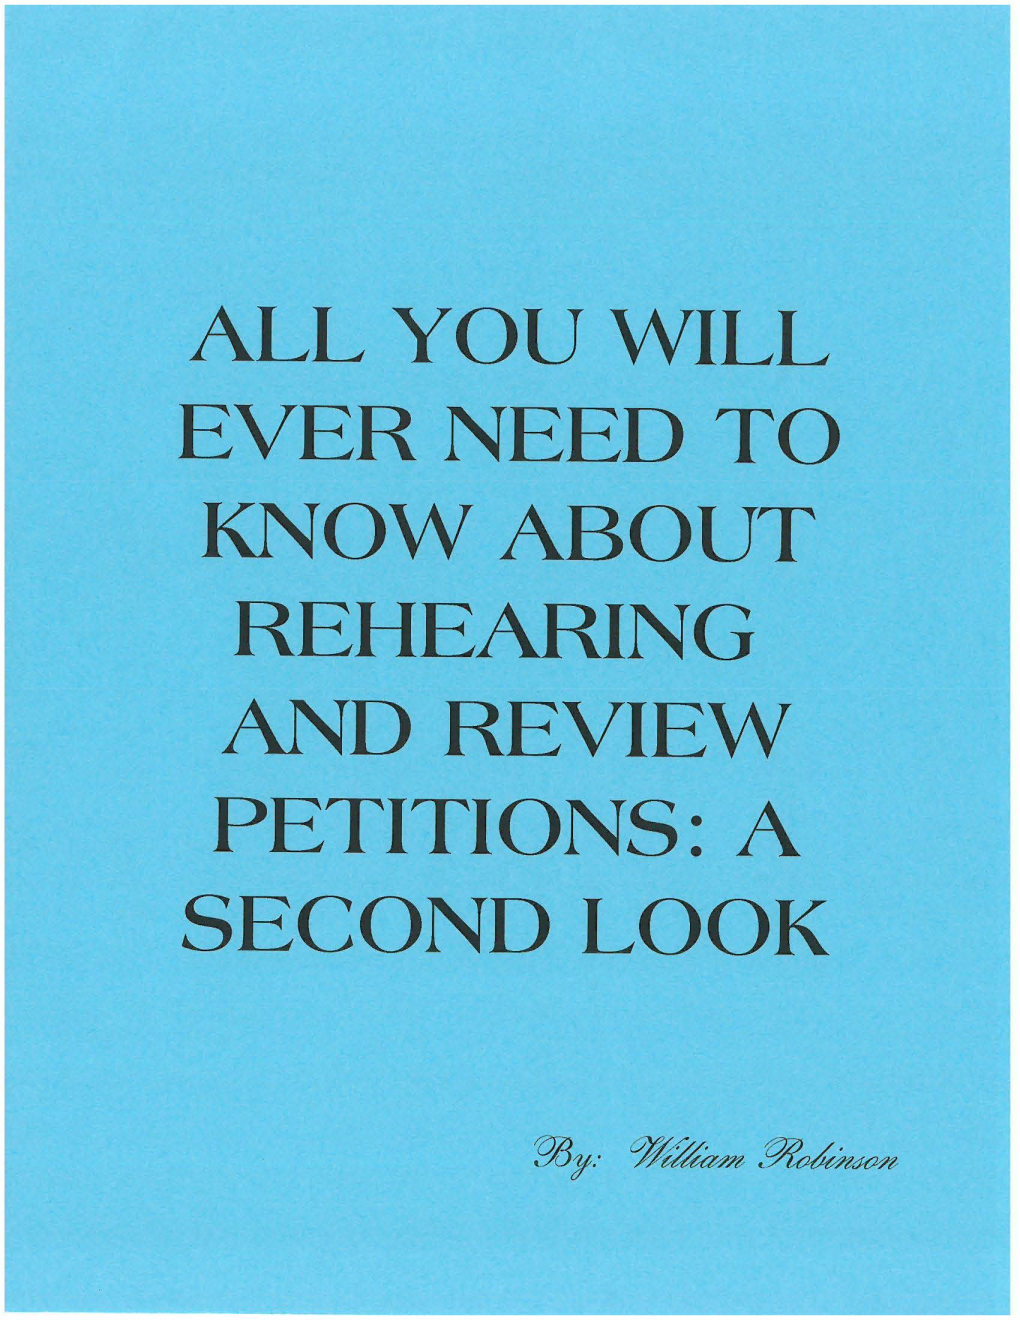 All You Will Ever Need to Know About Rehearing and Review Petitions: a Second Look Table of Contents